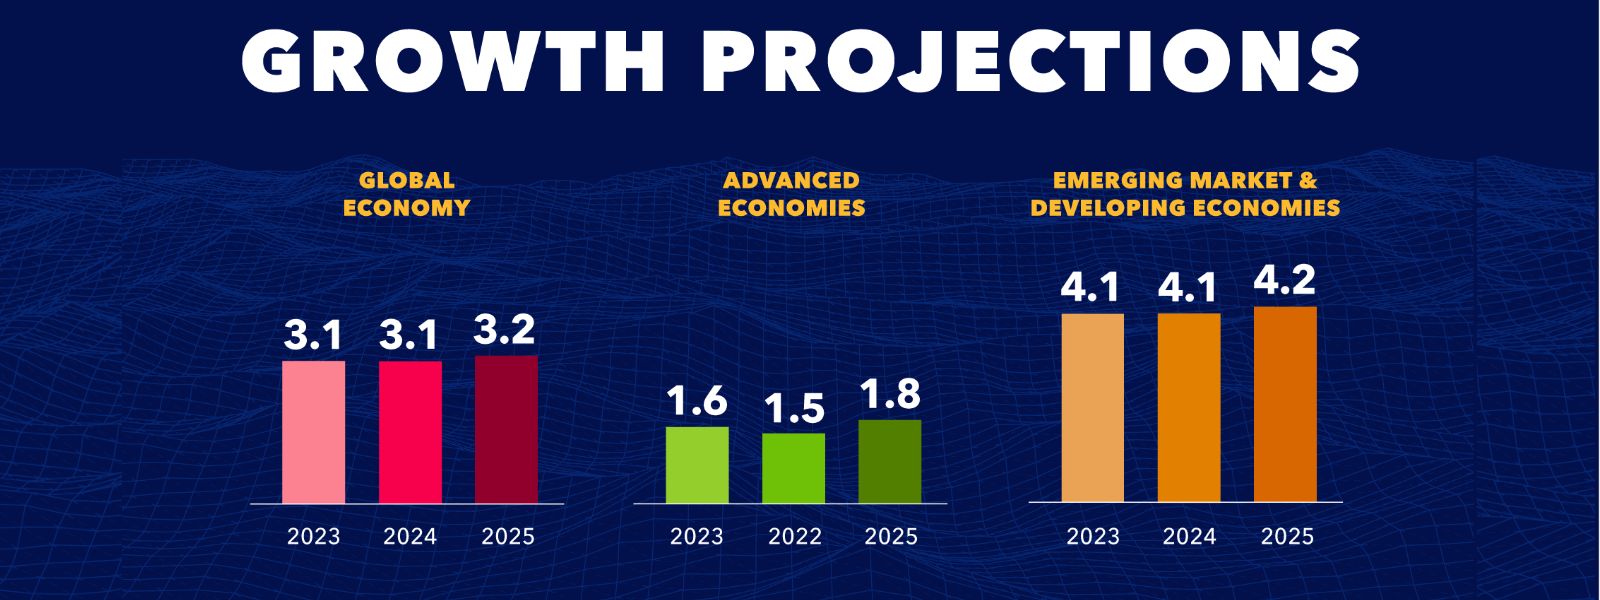 Global growth projected at 3.1% in 2024 - IMF